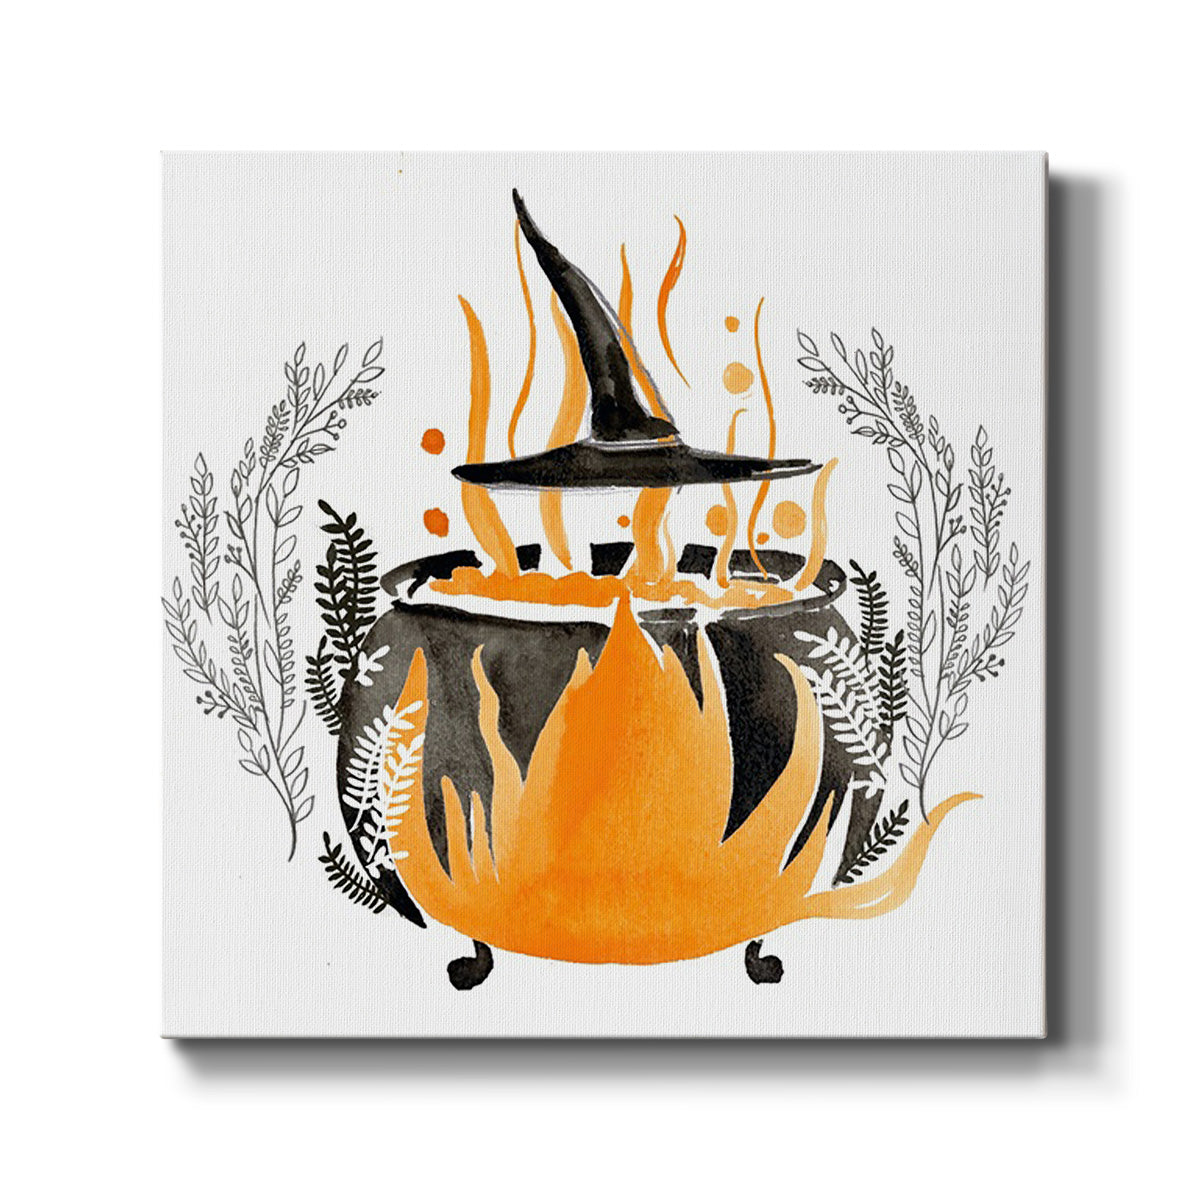 Witchy Mischief Collection C -Premium Gallery Wrapped Canvas - Ready to Hang